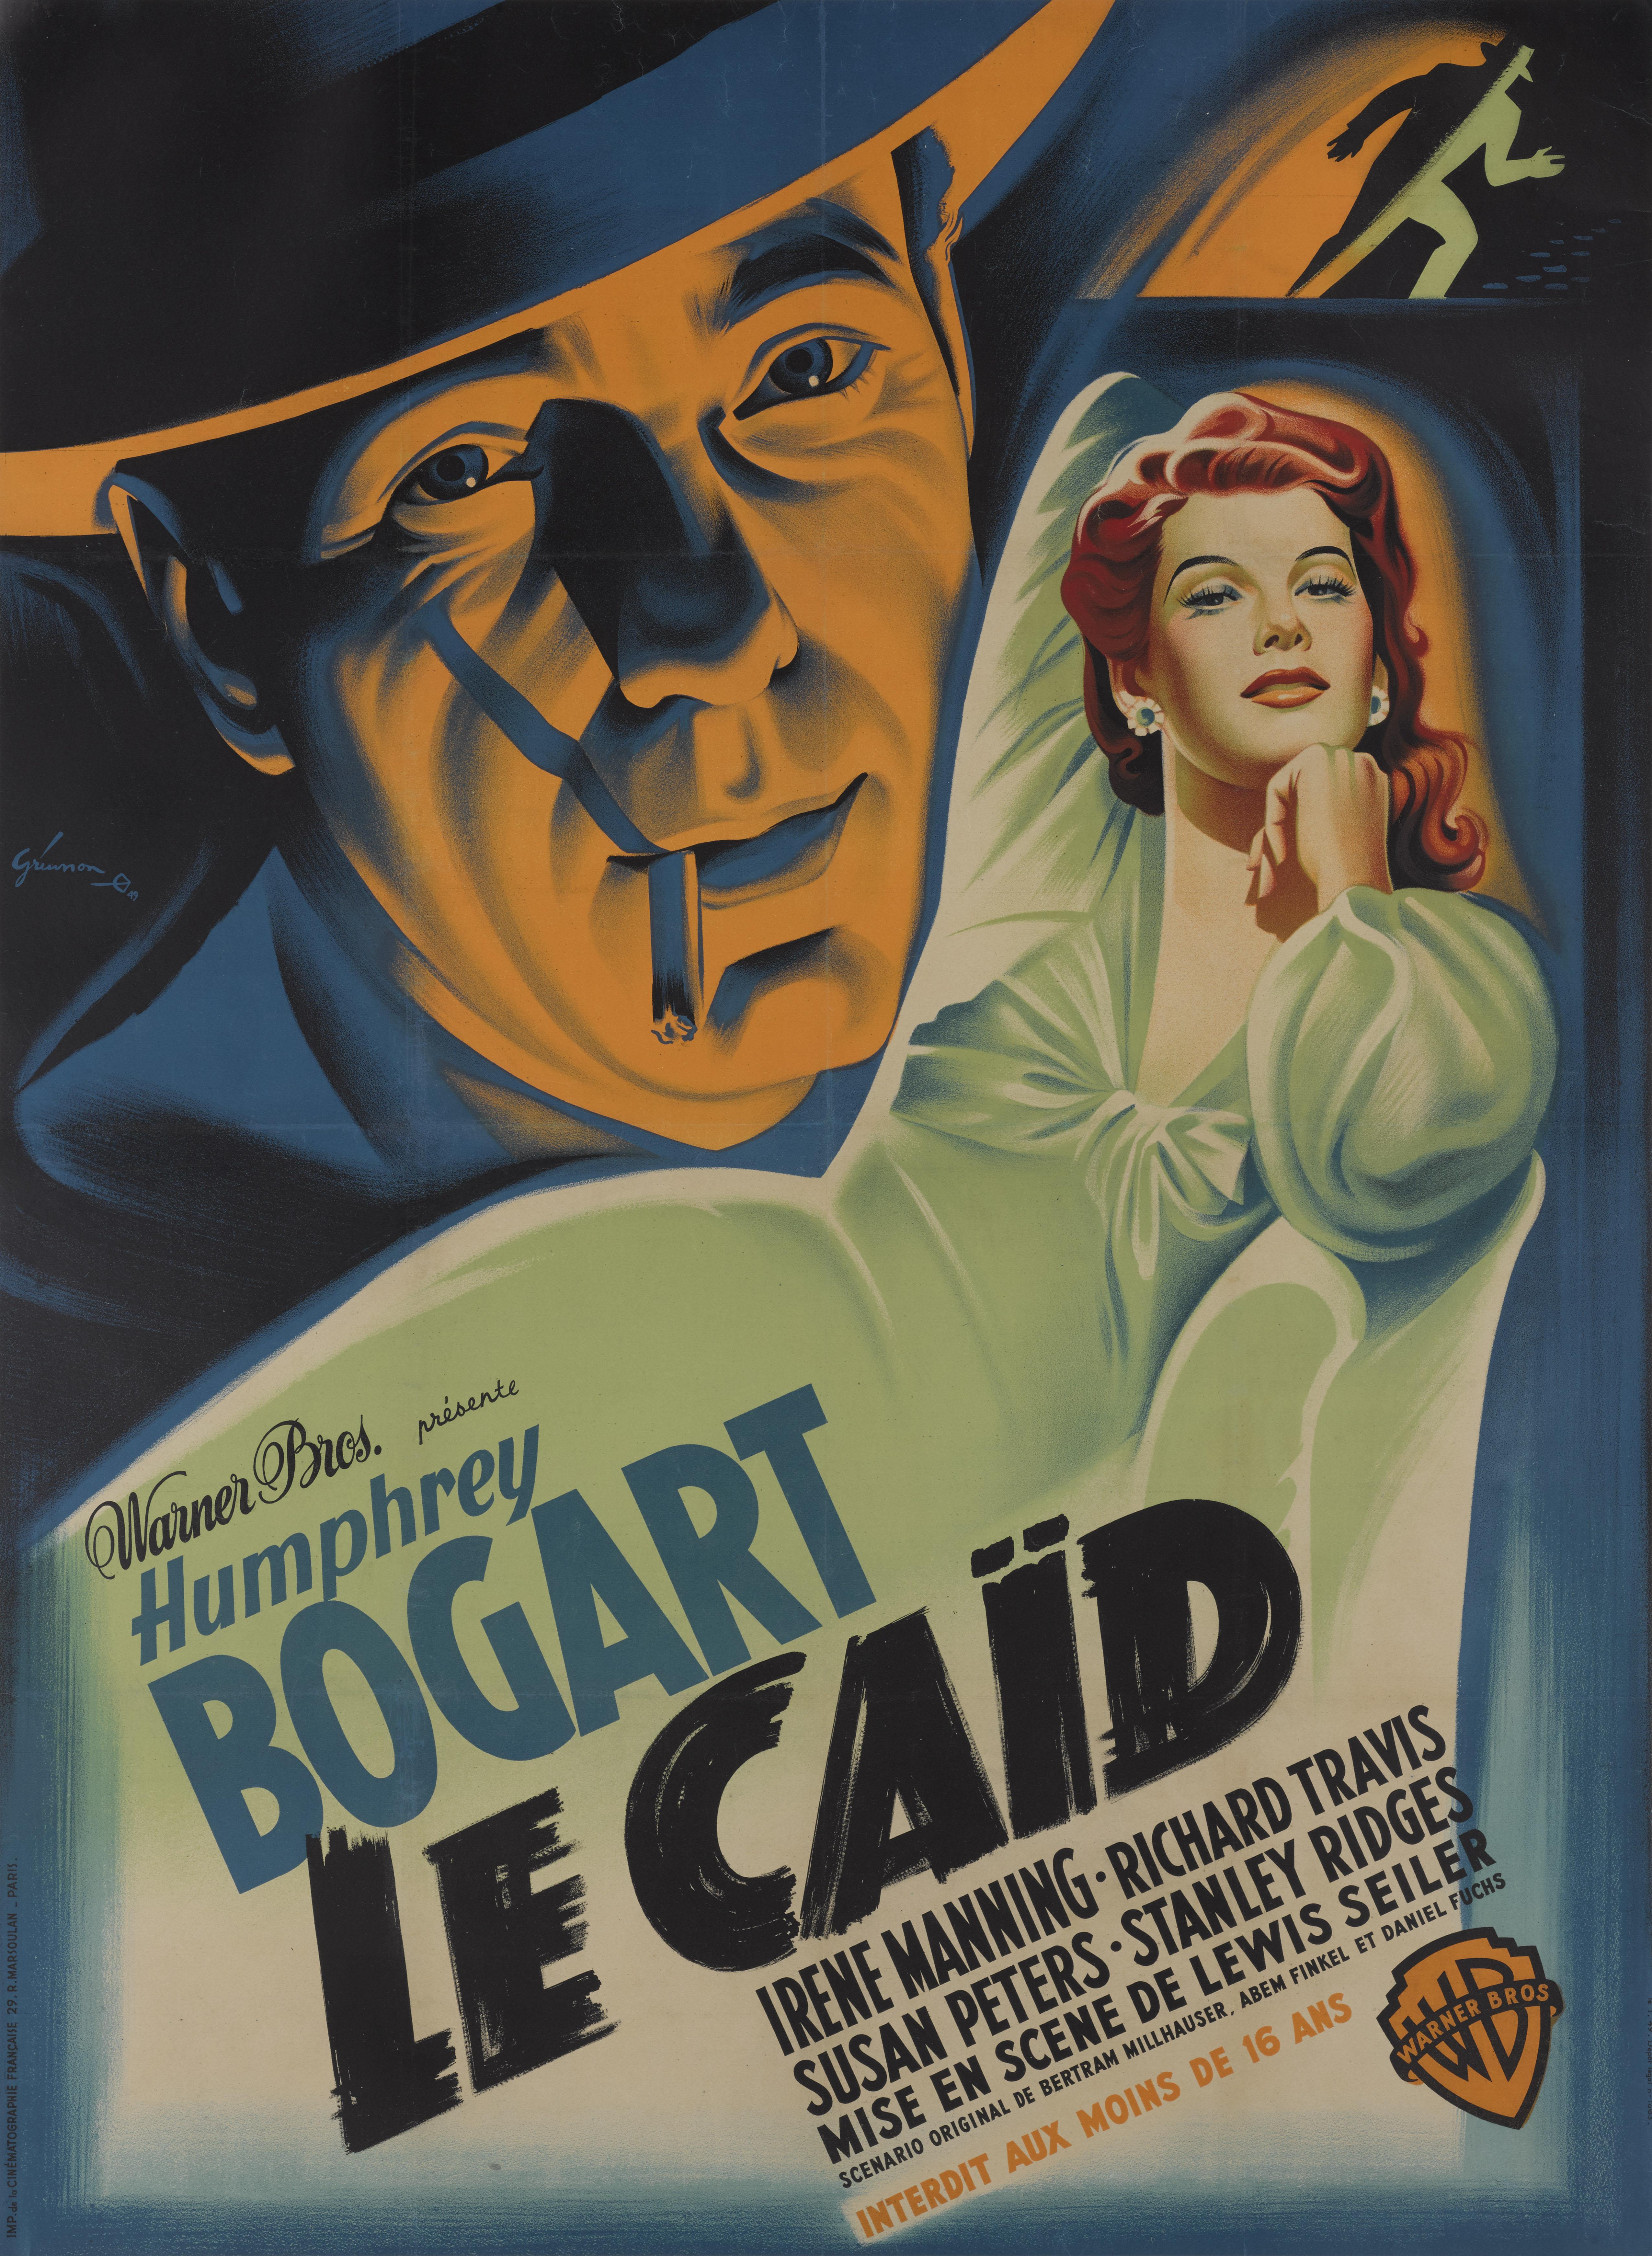 Original French film poster from the 1942 Film Noir.
These large French posters were designed to be pasted onto billboards throughout France, and therefore the only ones to have survived were ones that were not used. Not only is this poster by one